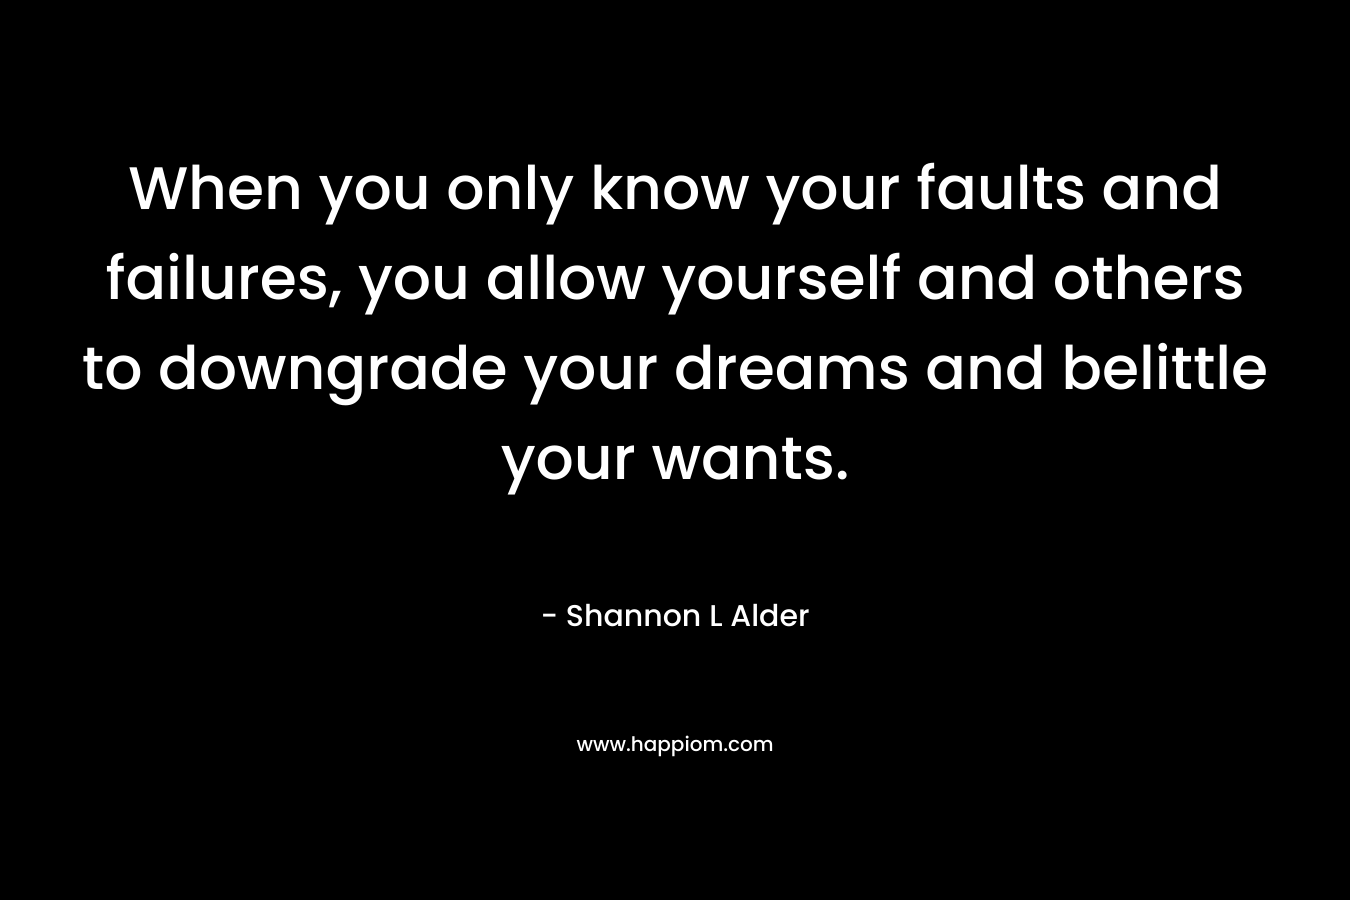 When you only know your faults and failures, you allow yourself and others to downgrade your dreams and belittle your wants.